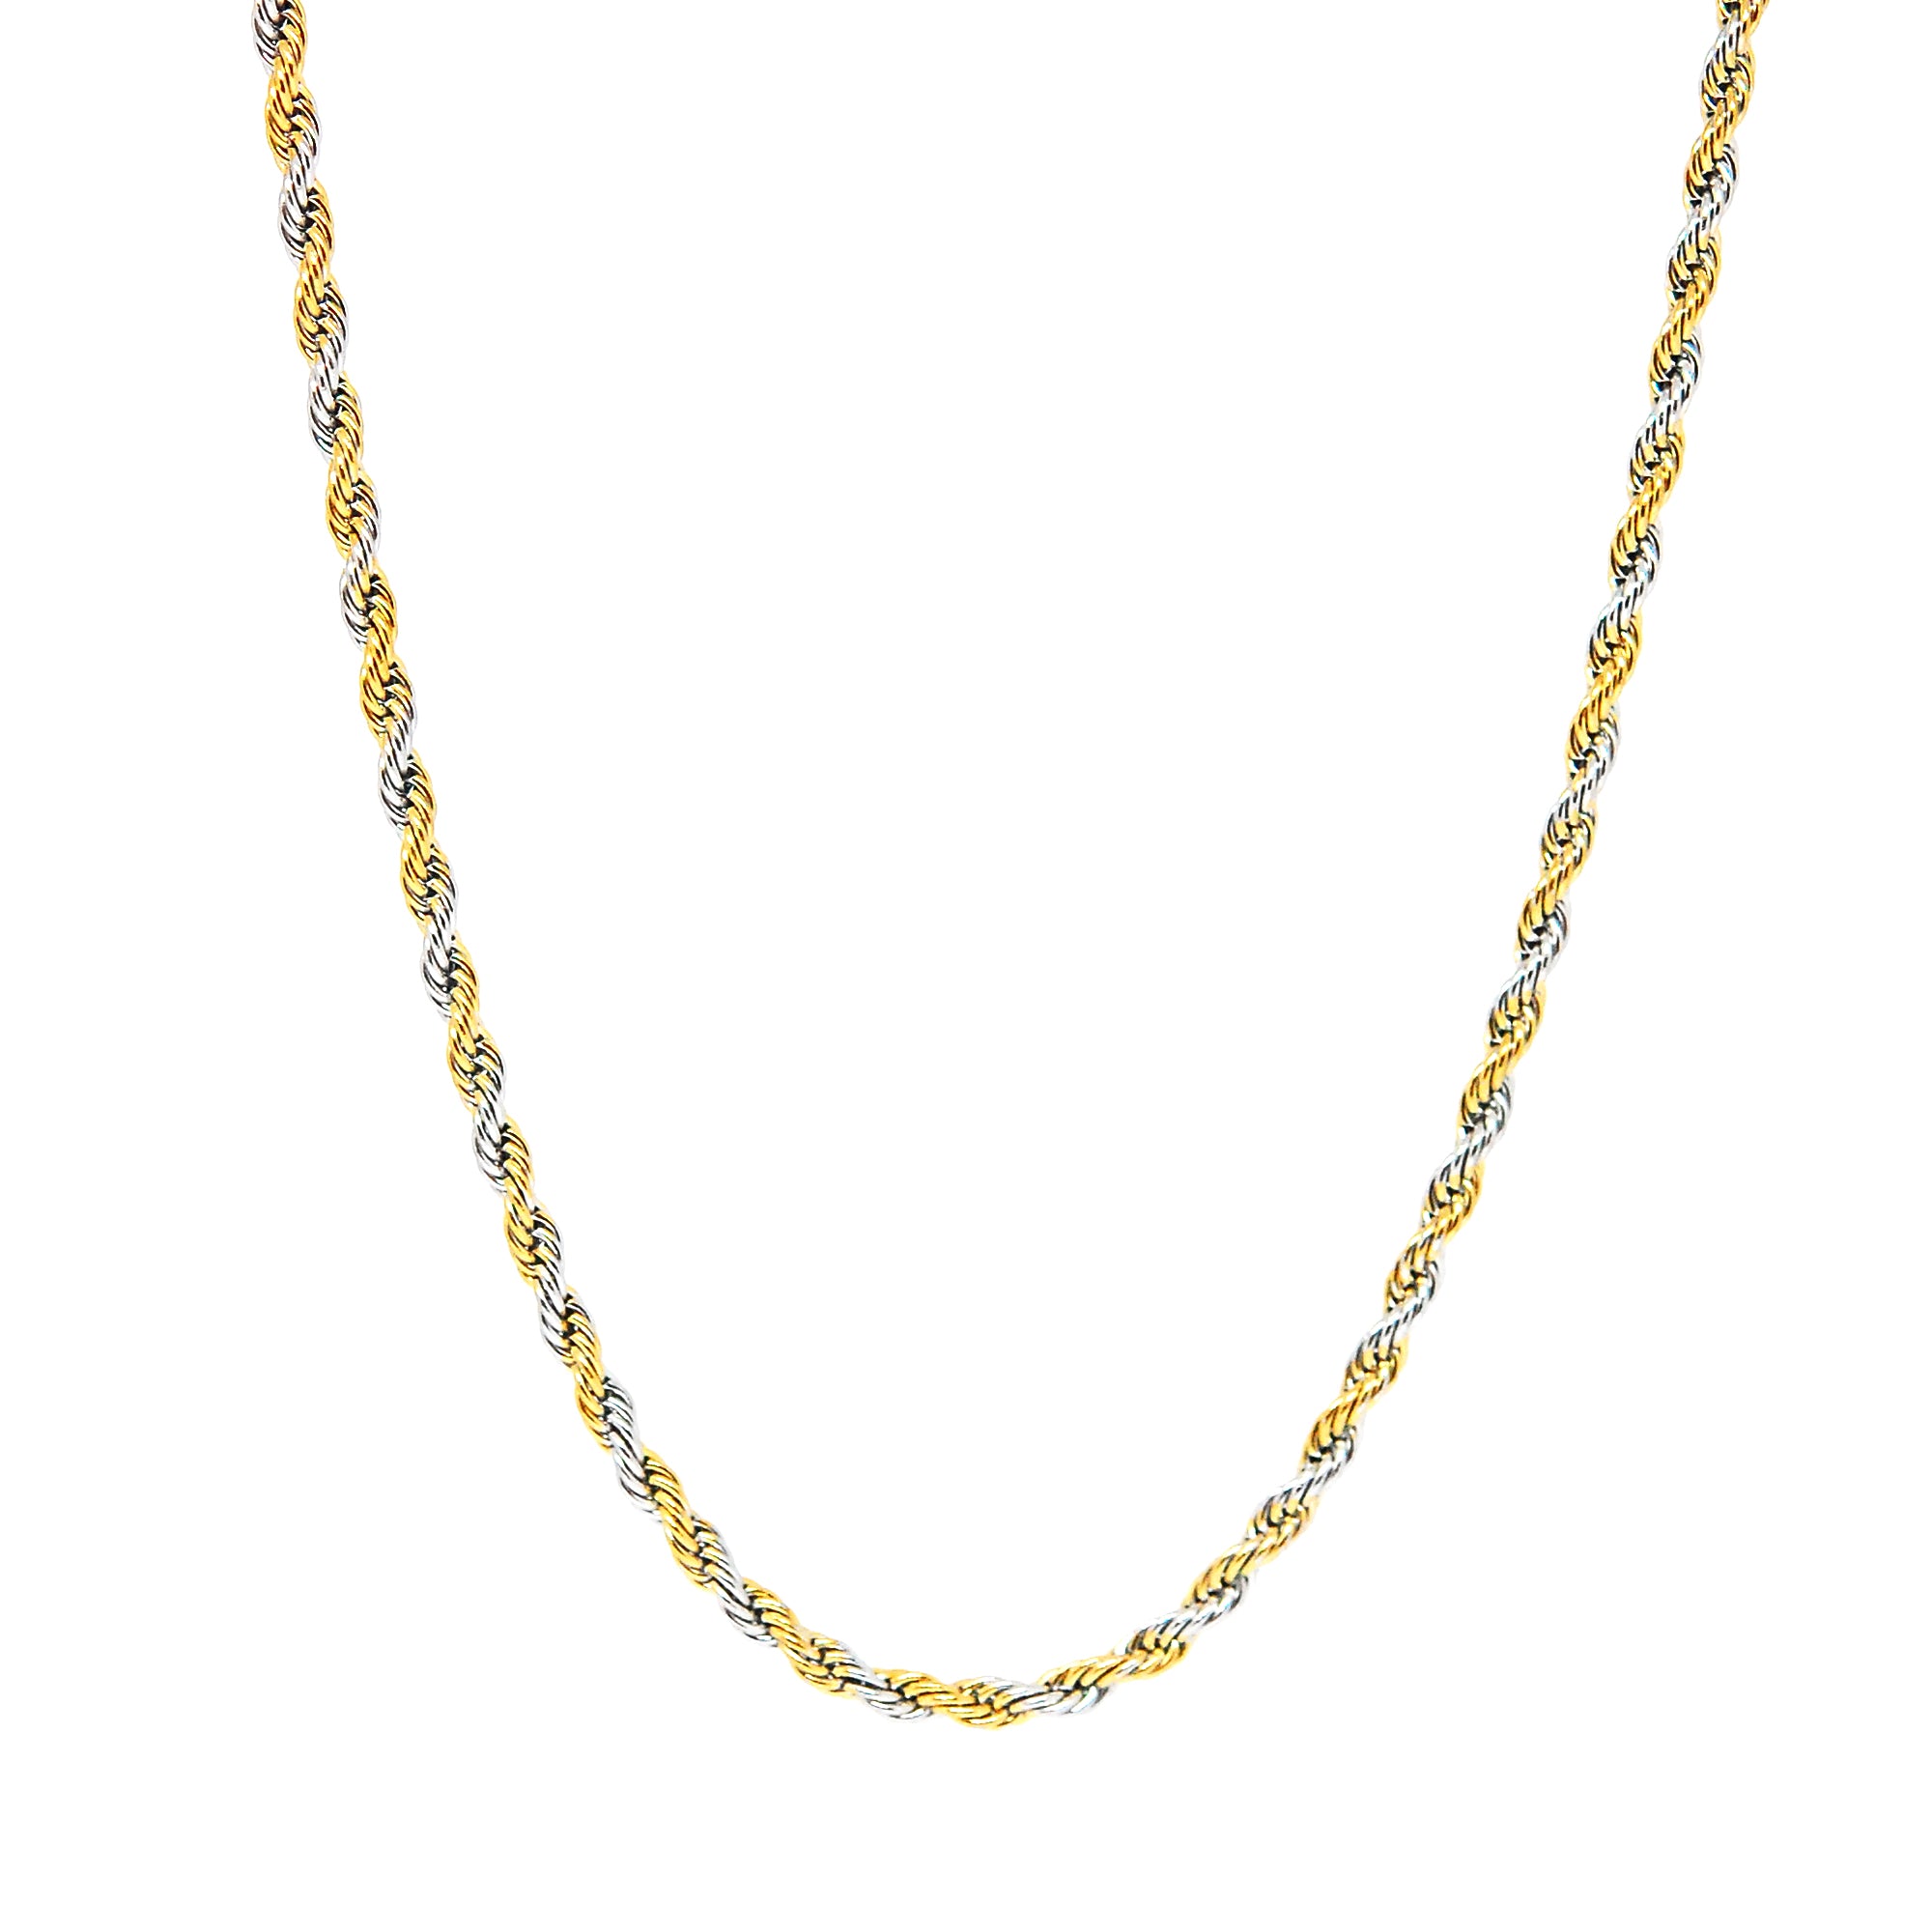 ESCH 6404: 22" Two-Tone Twisted Rope Chain (2mm)